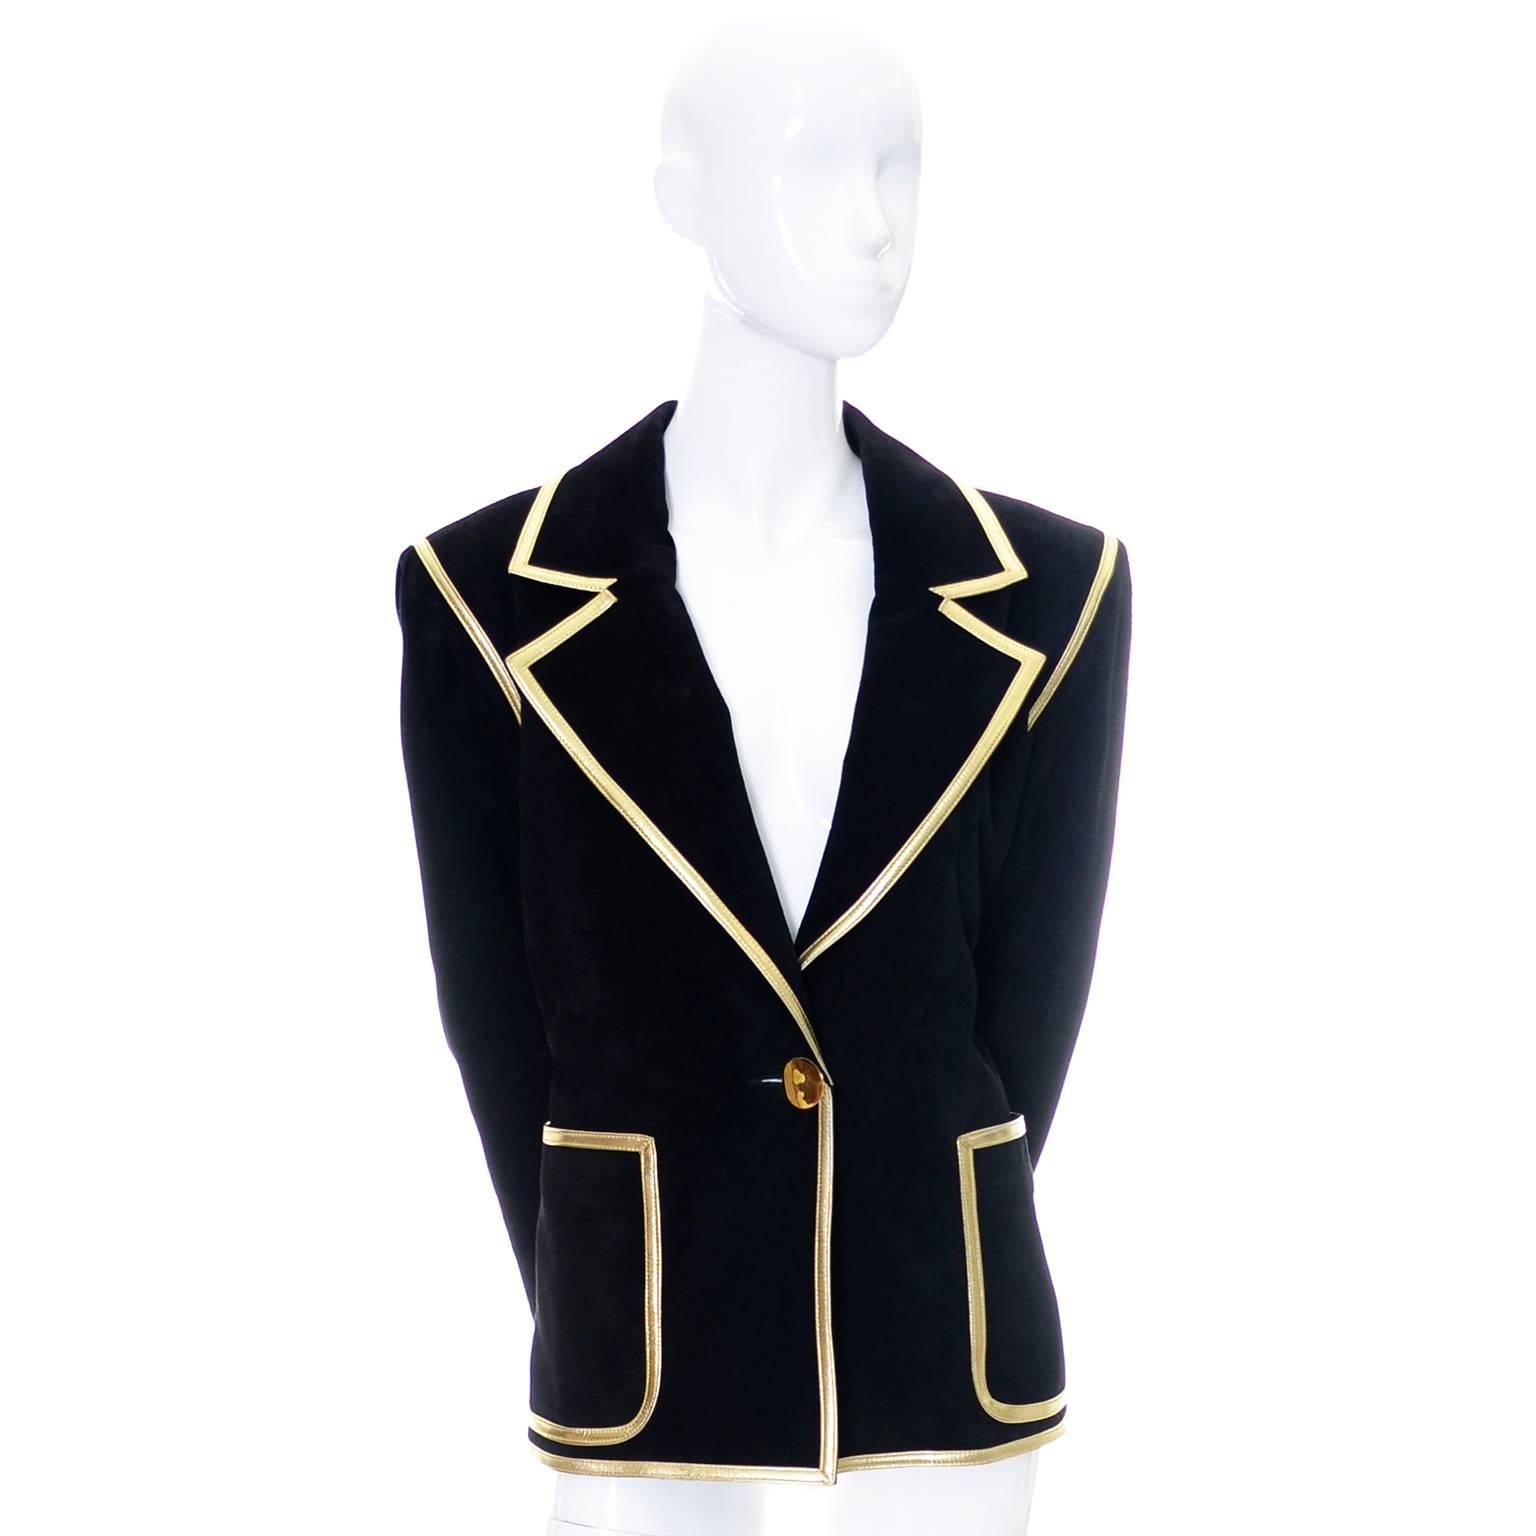 This is an outstanding vintage jacket from Yves Saint Laurent. This as new vintage blazer is fully lined and is made of a luxe black calf suede and trimmed in metallic gold leather.  This coat has the Saint Laurent Rive Gauche Label and was made in